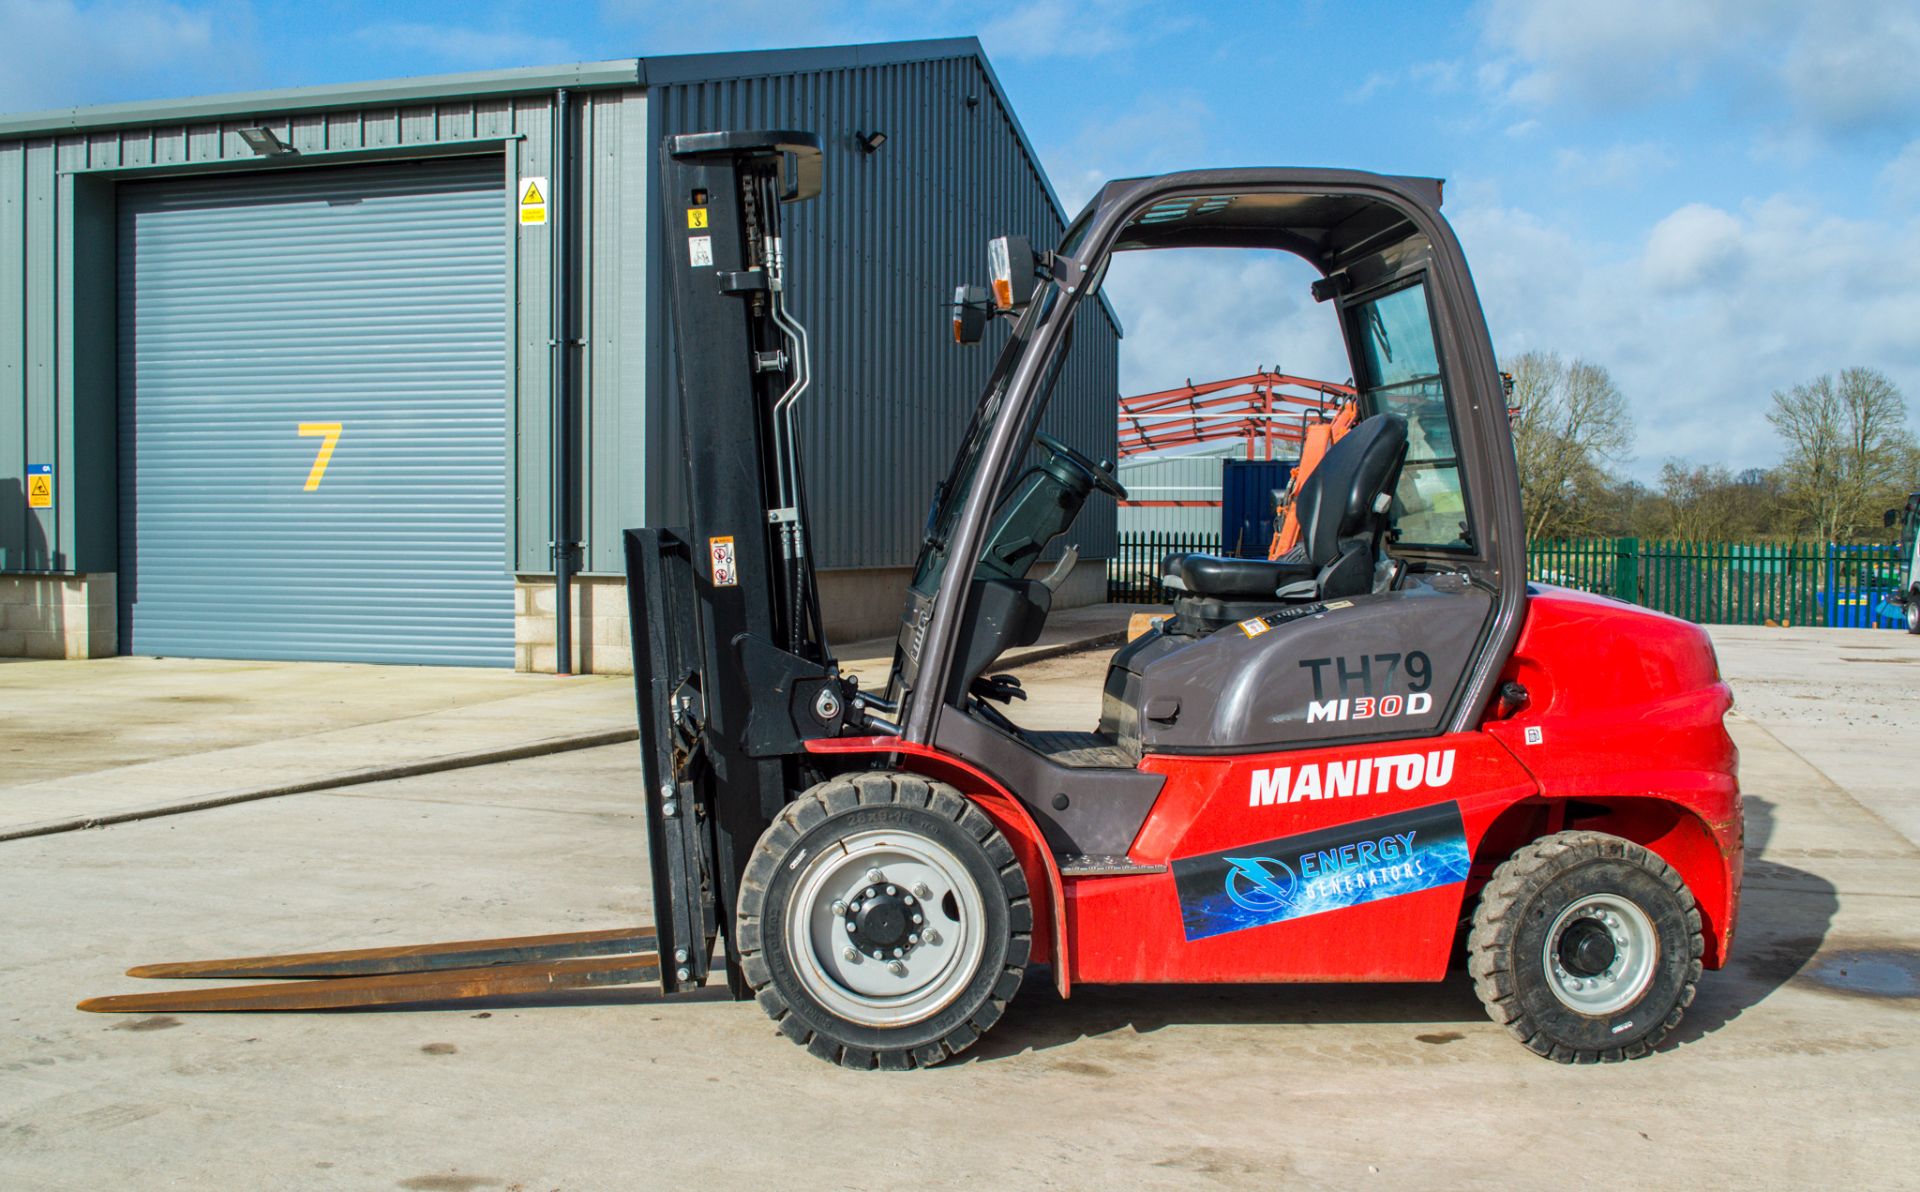 Manitou MI 30D 3 tonne diesel fork lift truck Year: 2020 S/N: 877370 Recorded Hours: 399 TH79 - Image 7 of 14